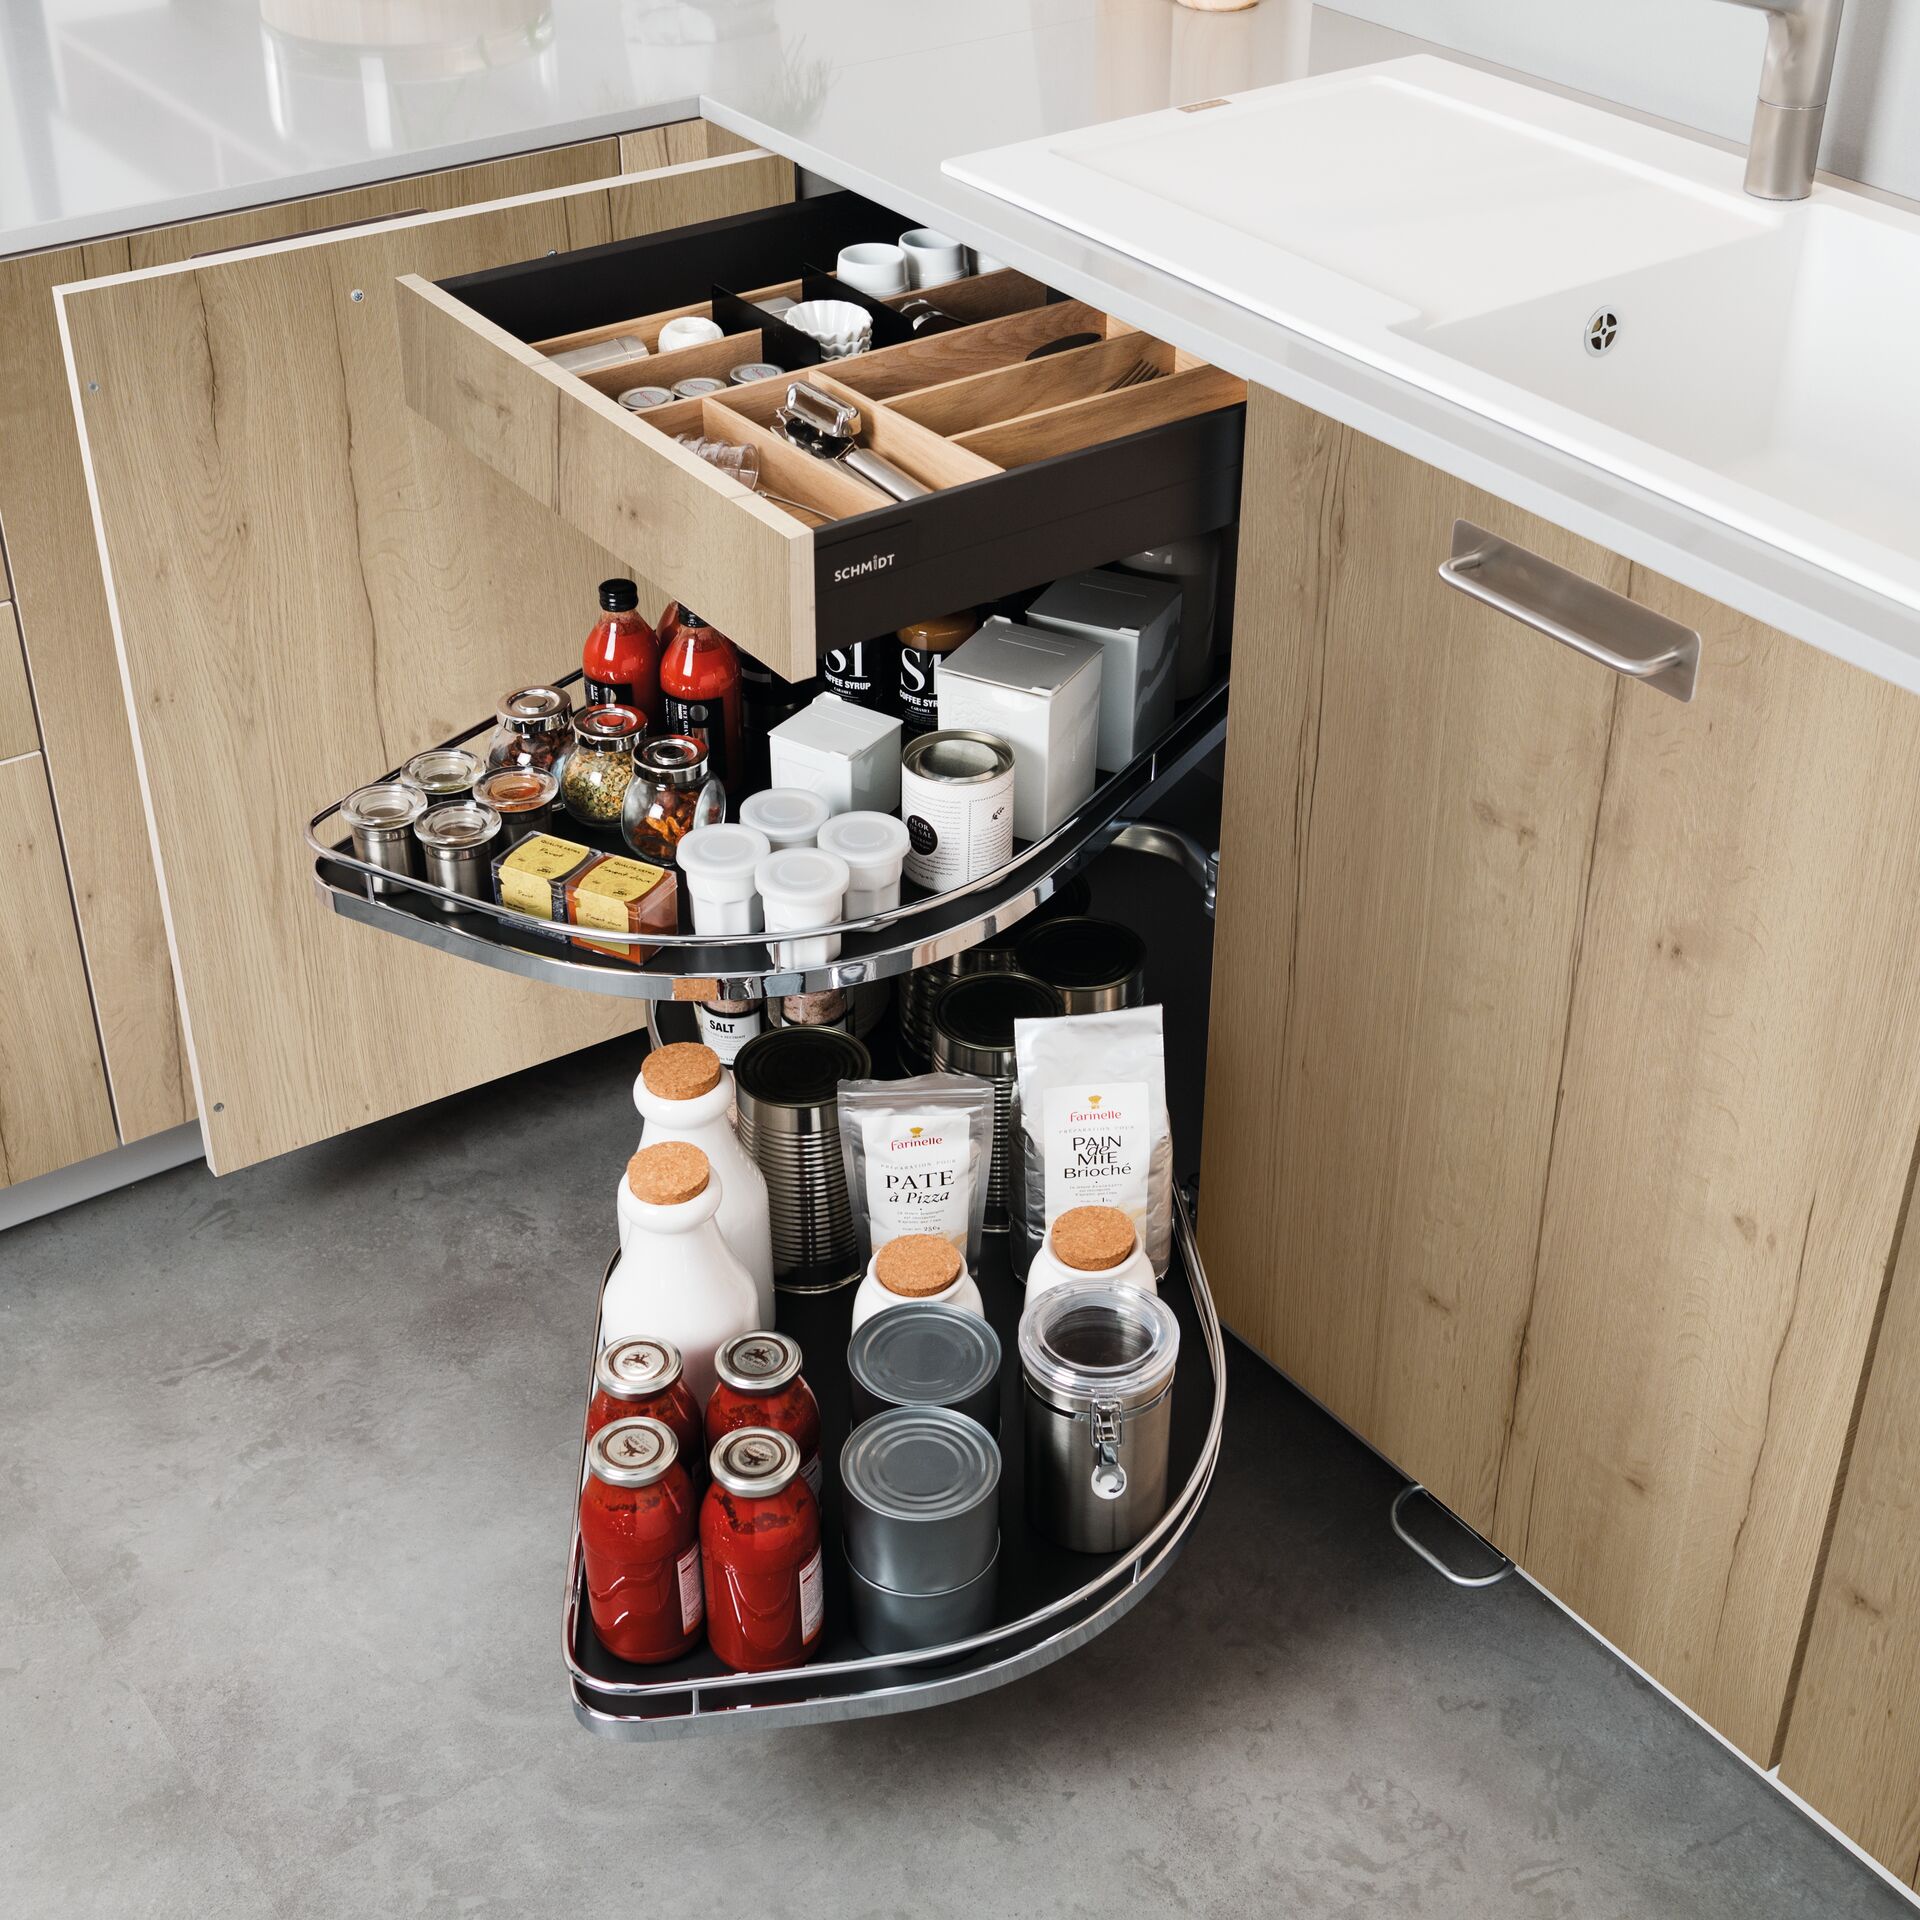 No space goes to waste, thanks to the easily accessible swivel trays in this corner unit